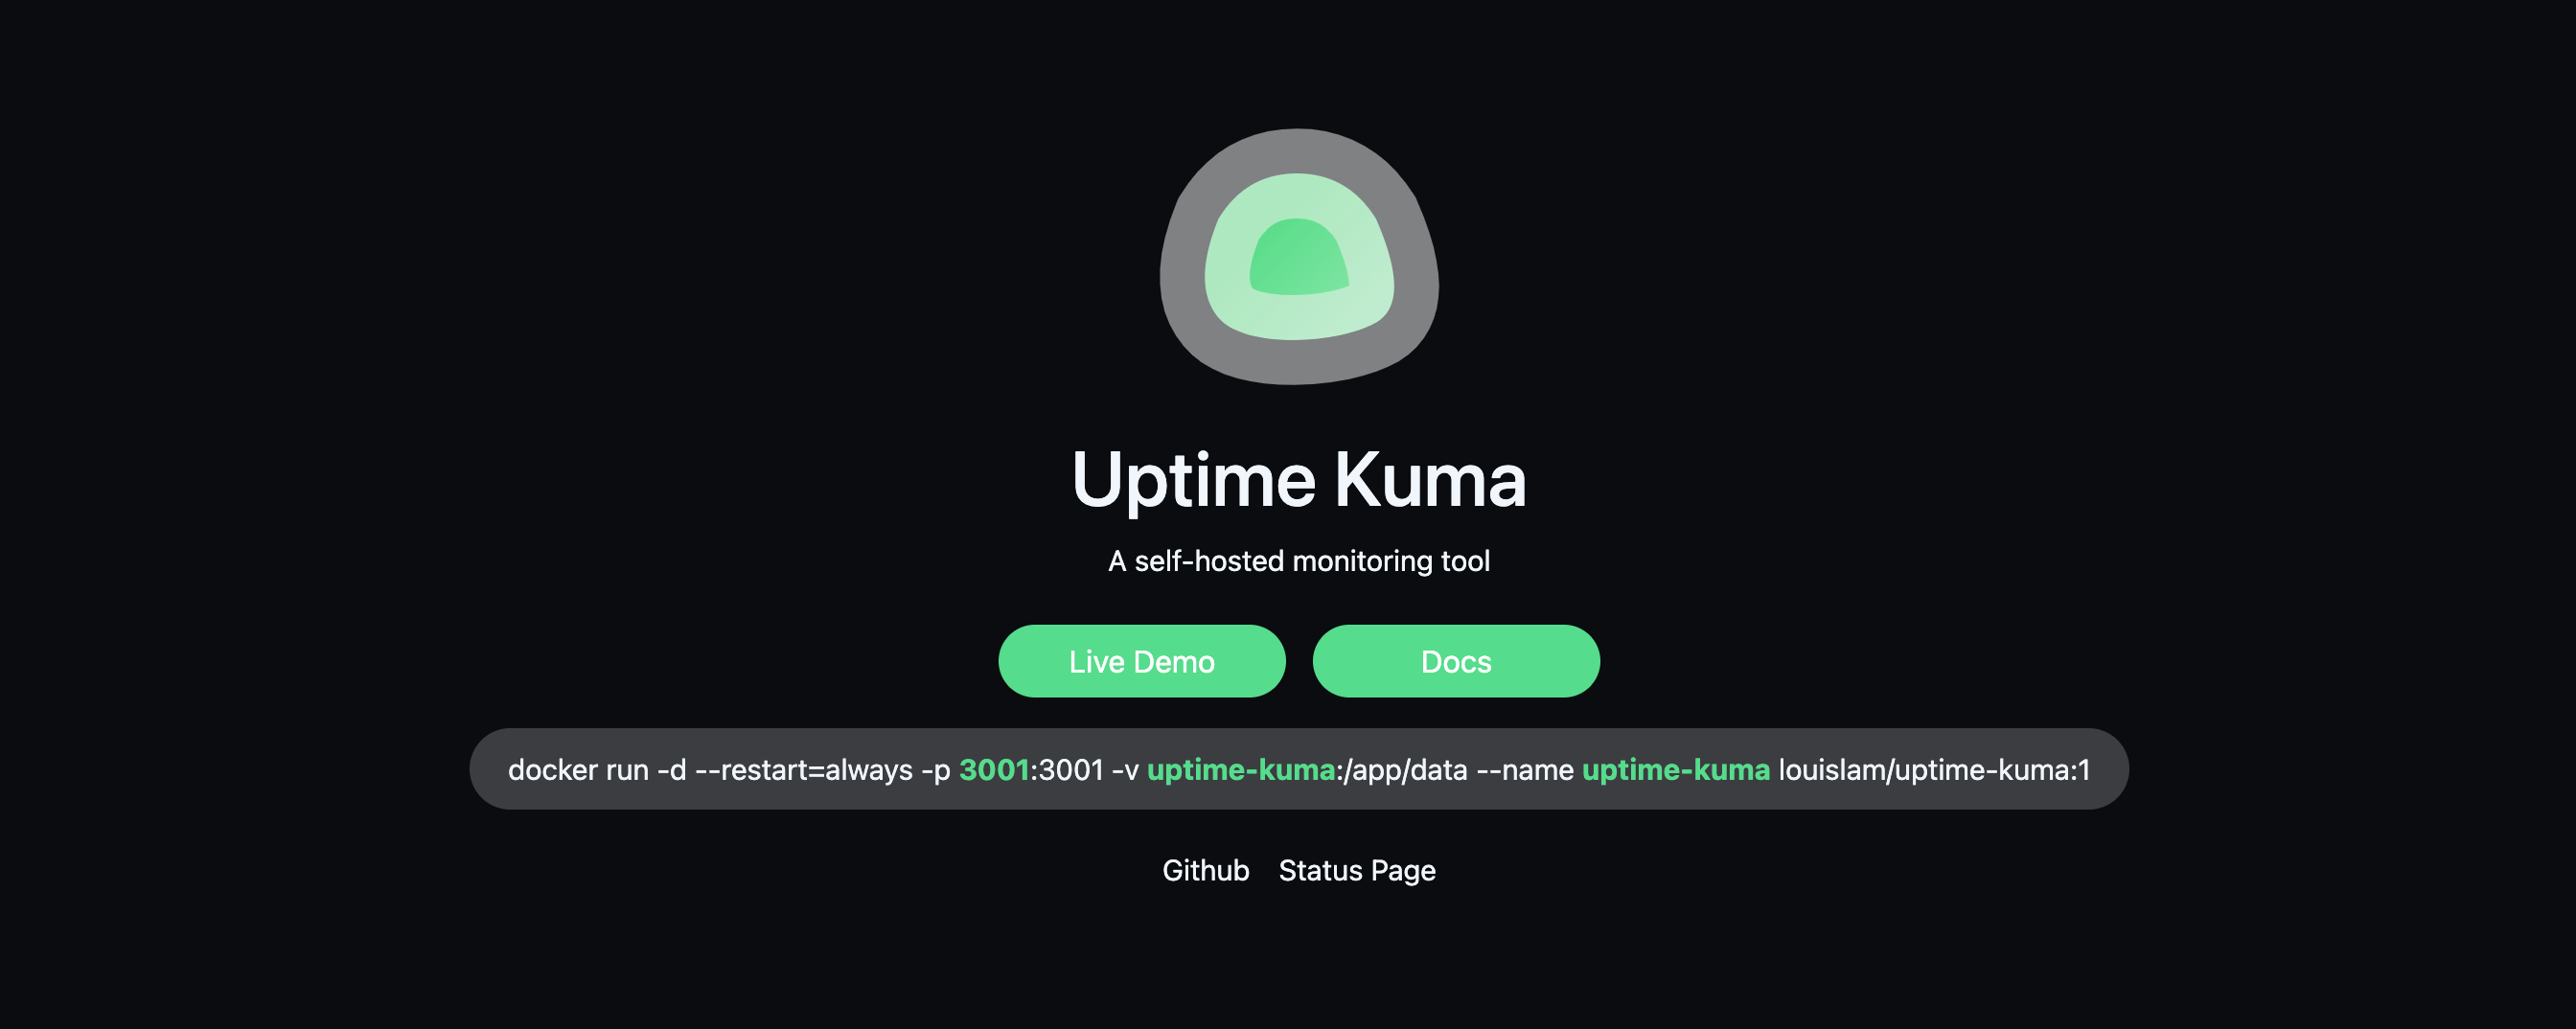 Testing 8 Top Rated Uptime Kuma Alternatives: Our Comprehensive Guide